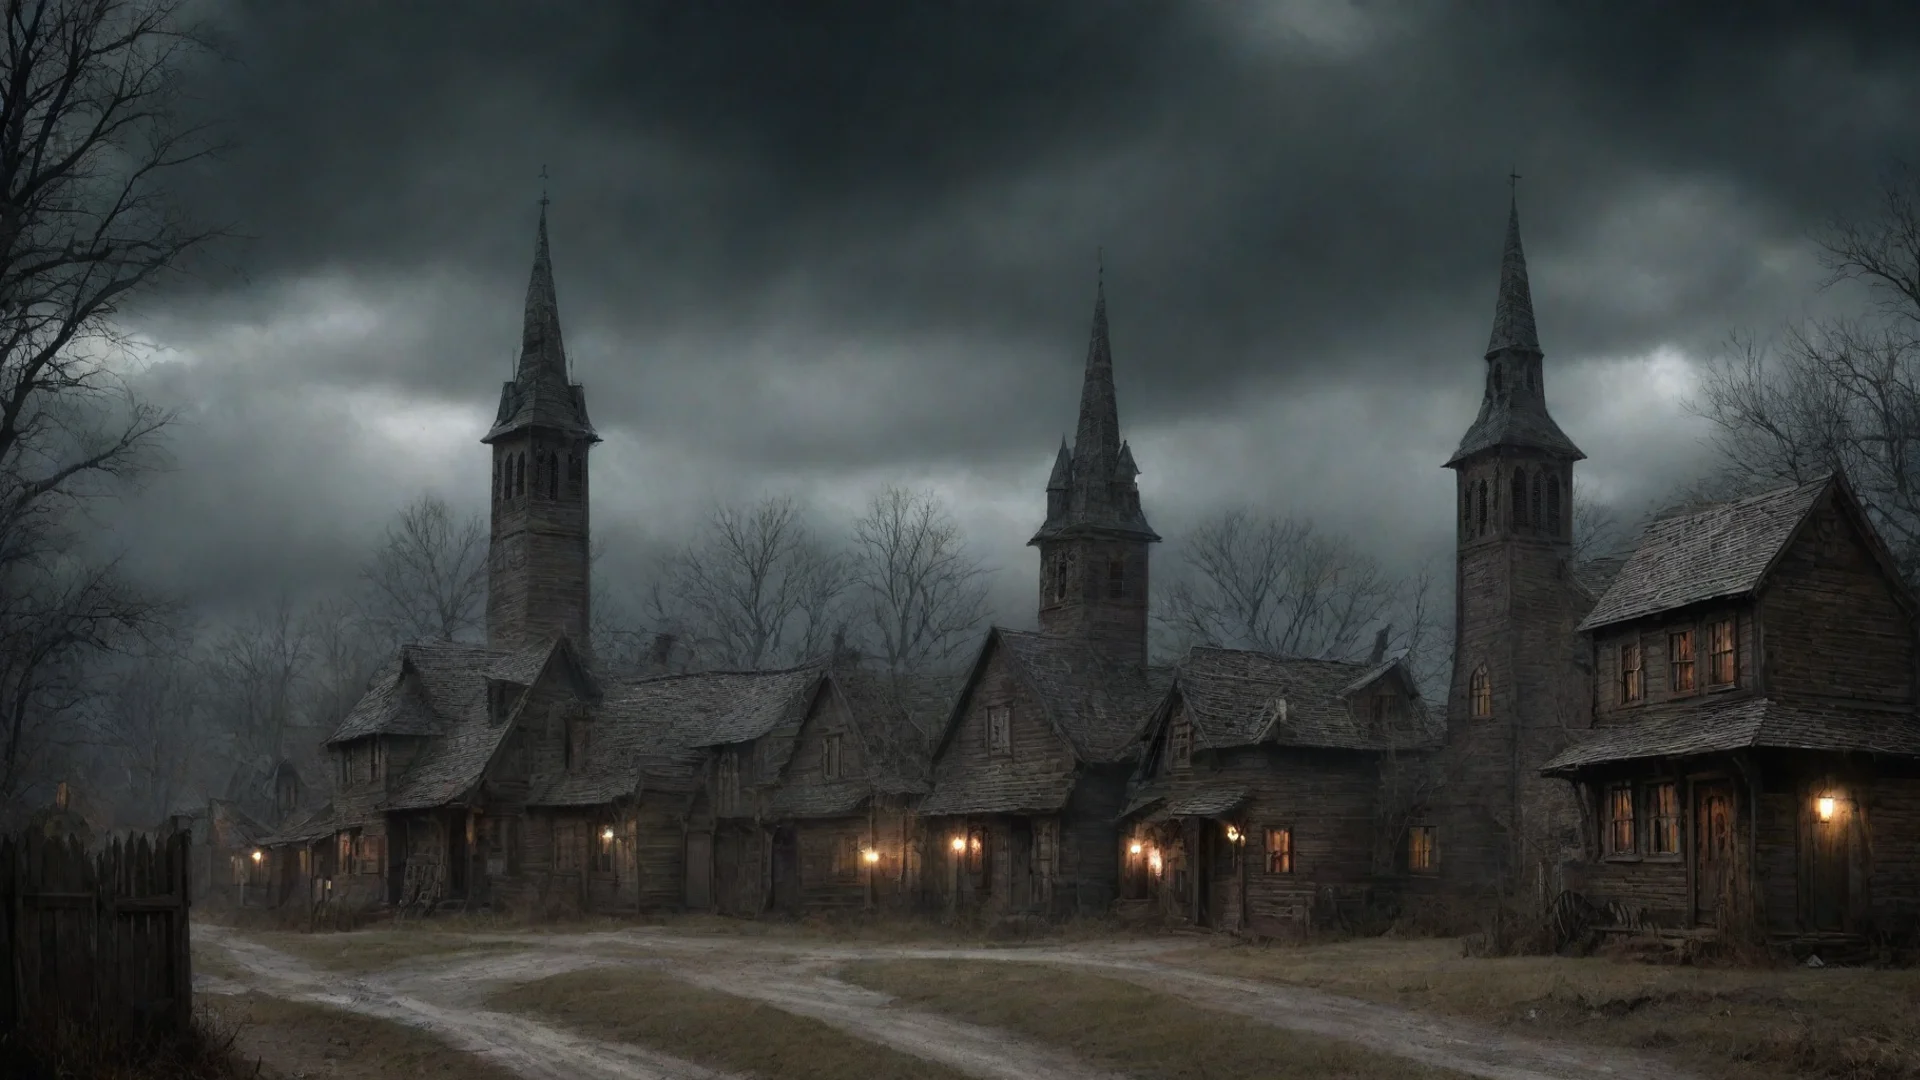 aiamazing old spooky town 1800s vampire town steeple olden days windswept hd epic awesome portrait 2 wide